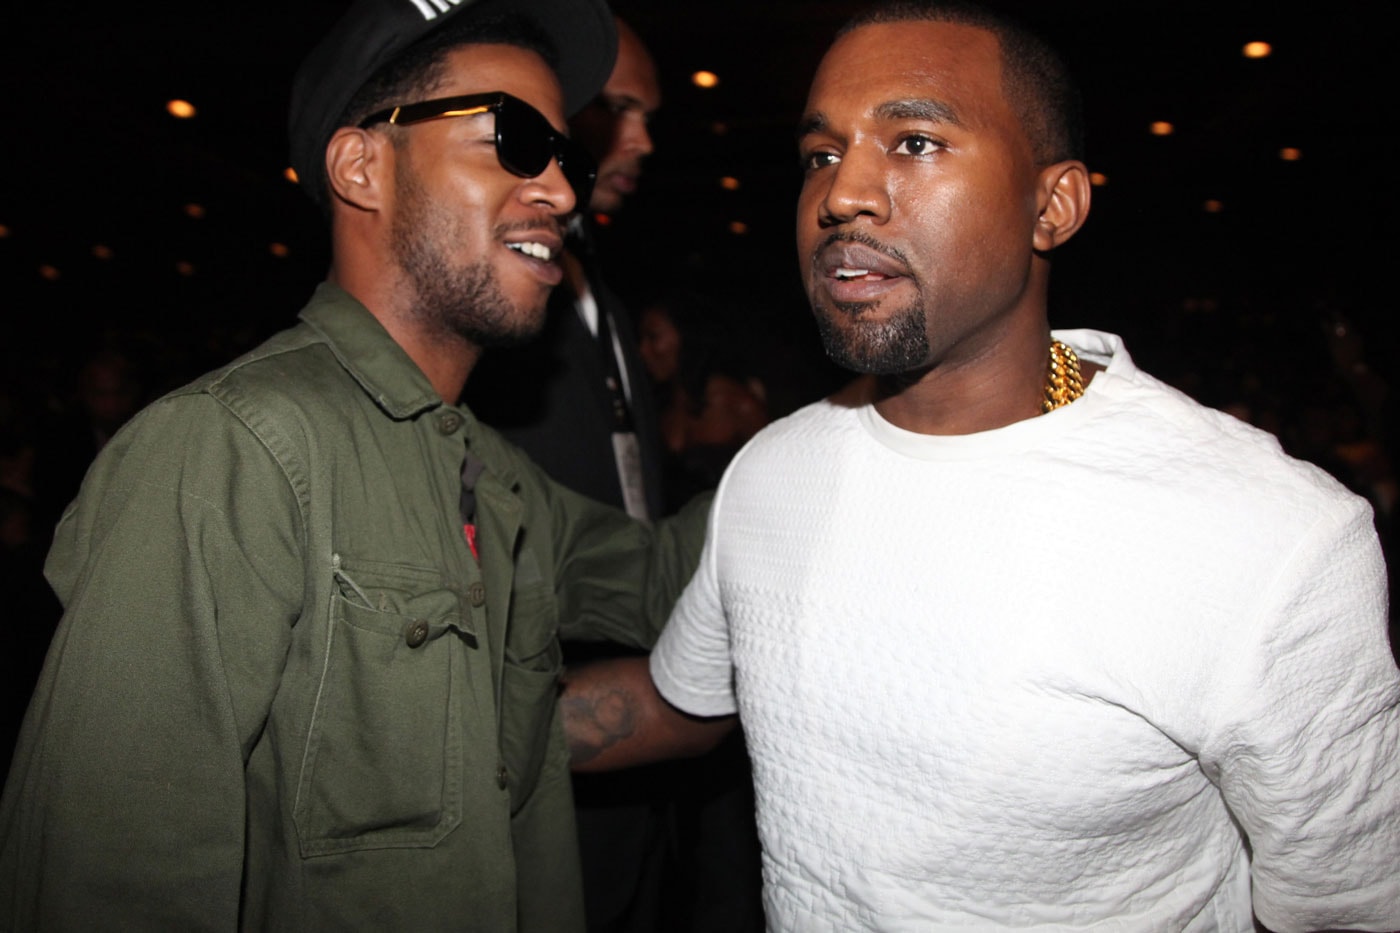 An Unreleased Kanye West & Kid Cudi Track Surfaces, "Too Bad I Have to Destroy You Now"